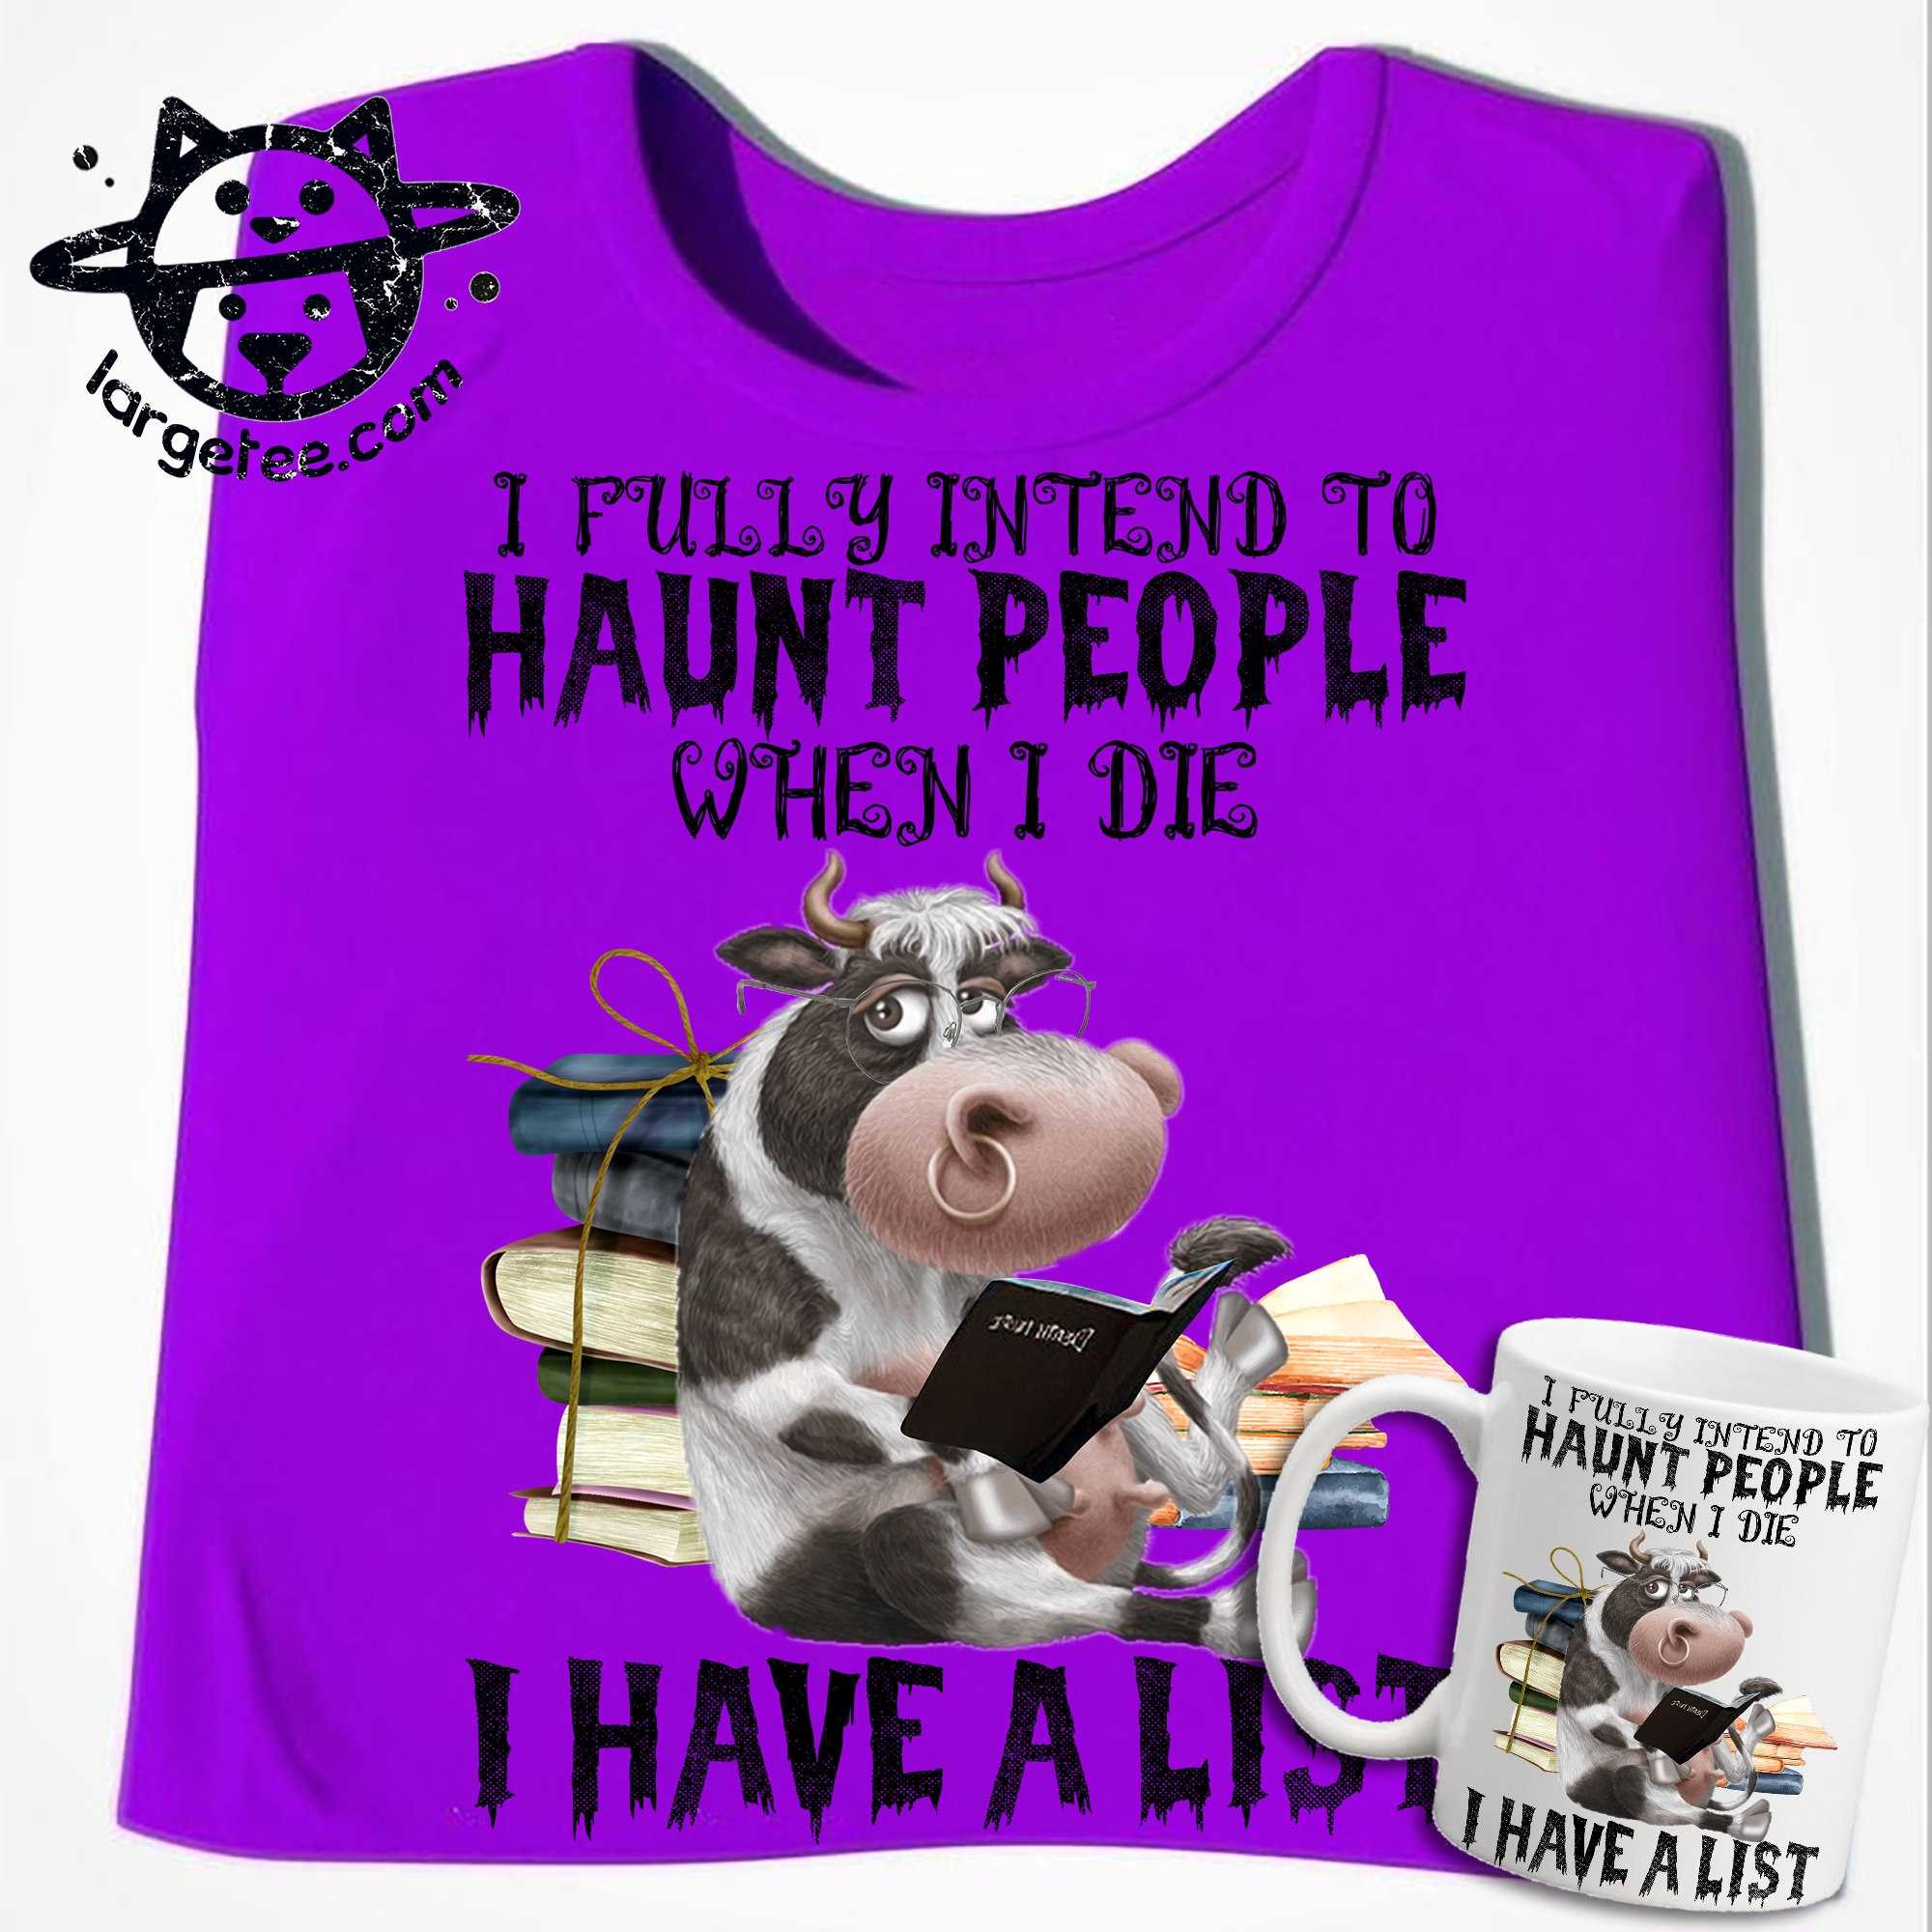 I fully intend to haunt people when I die I have a list - Death note, cow haunt people